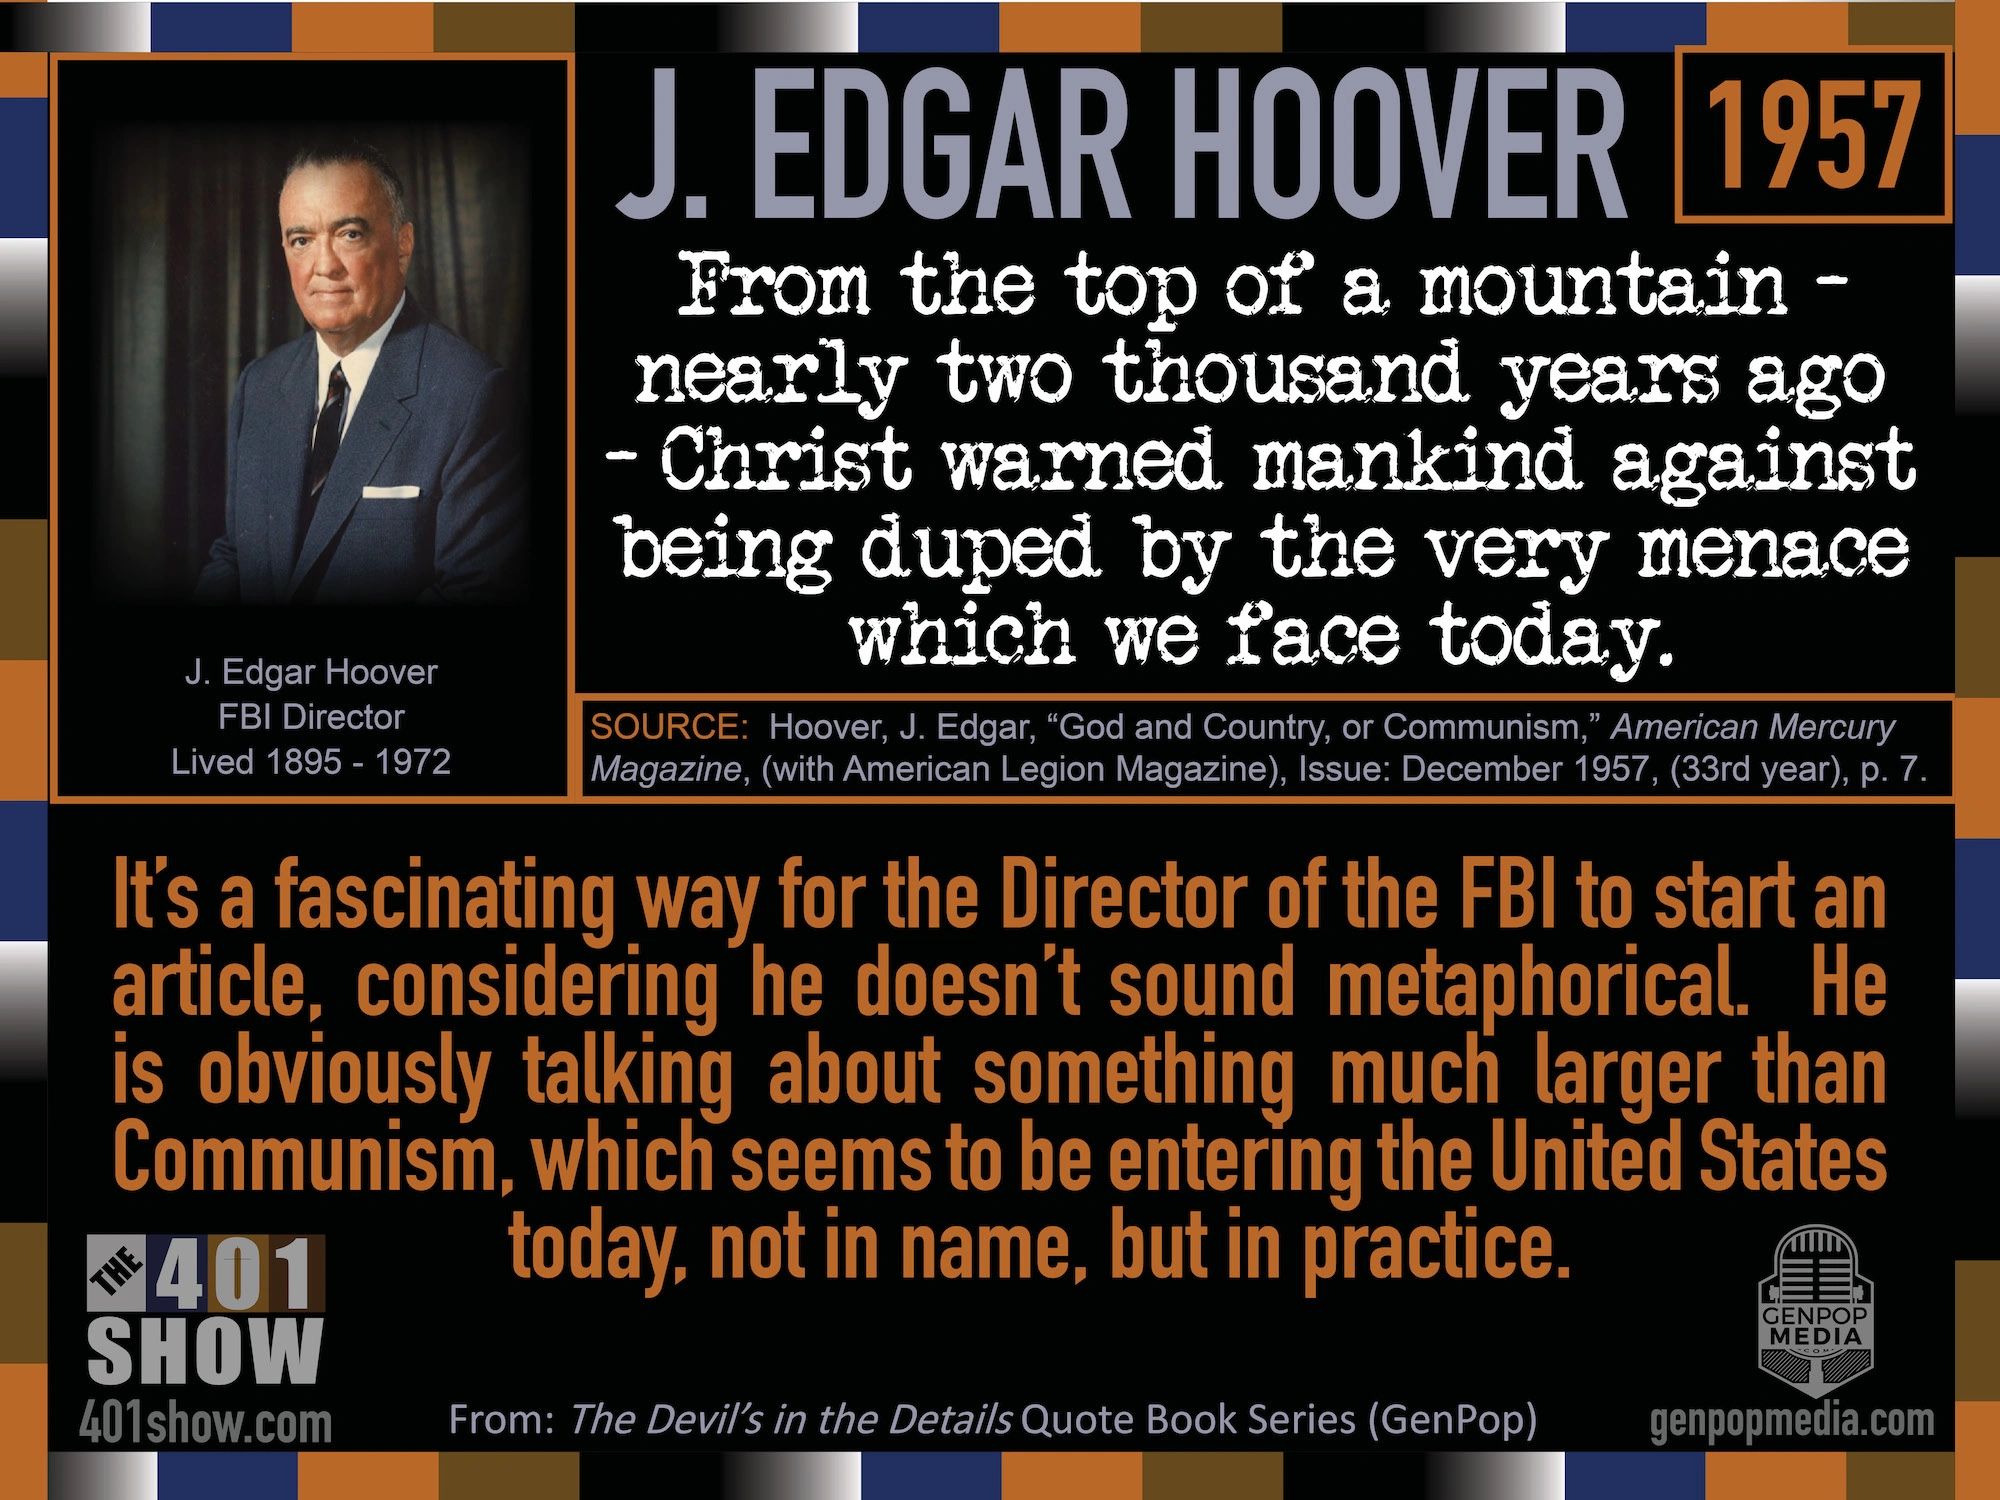 J. Edgar Hoover (FBI) quote: "From the top of a mountain nearly 2000 years ago..." 401quotes.com.